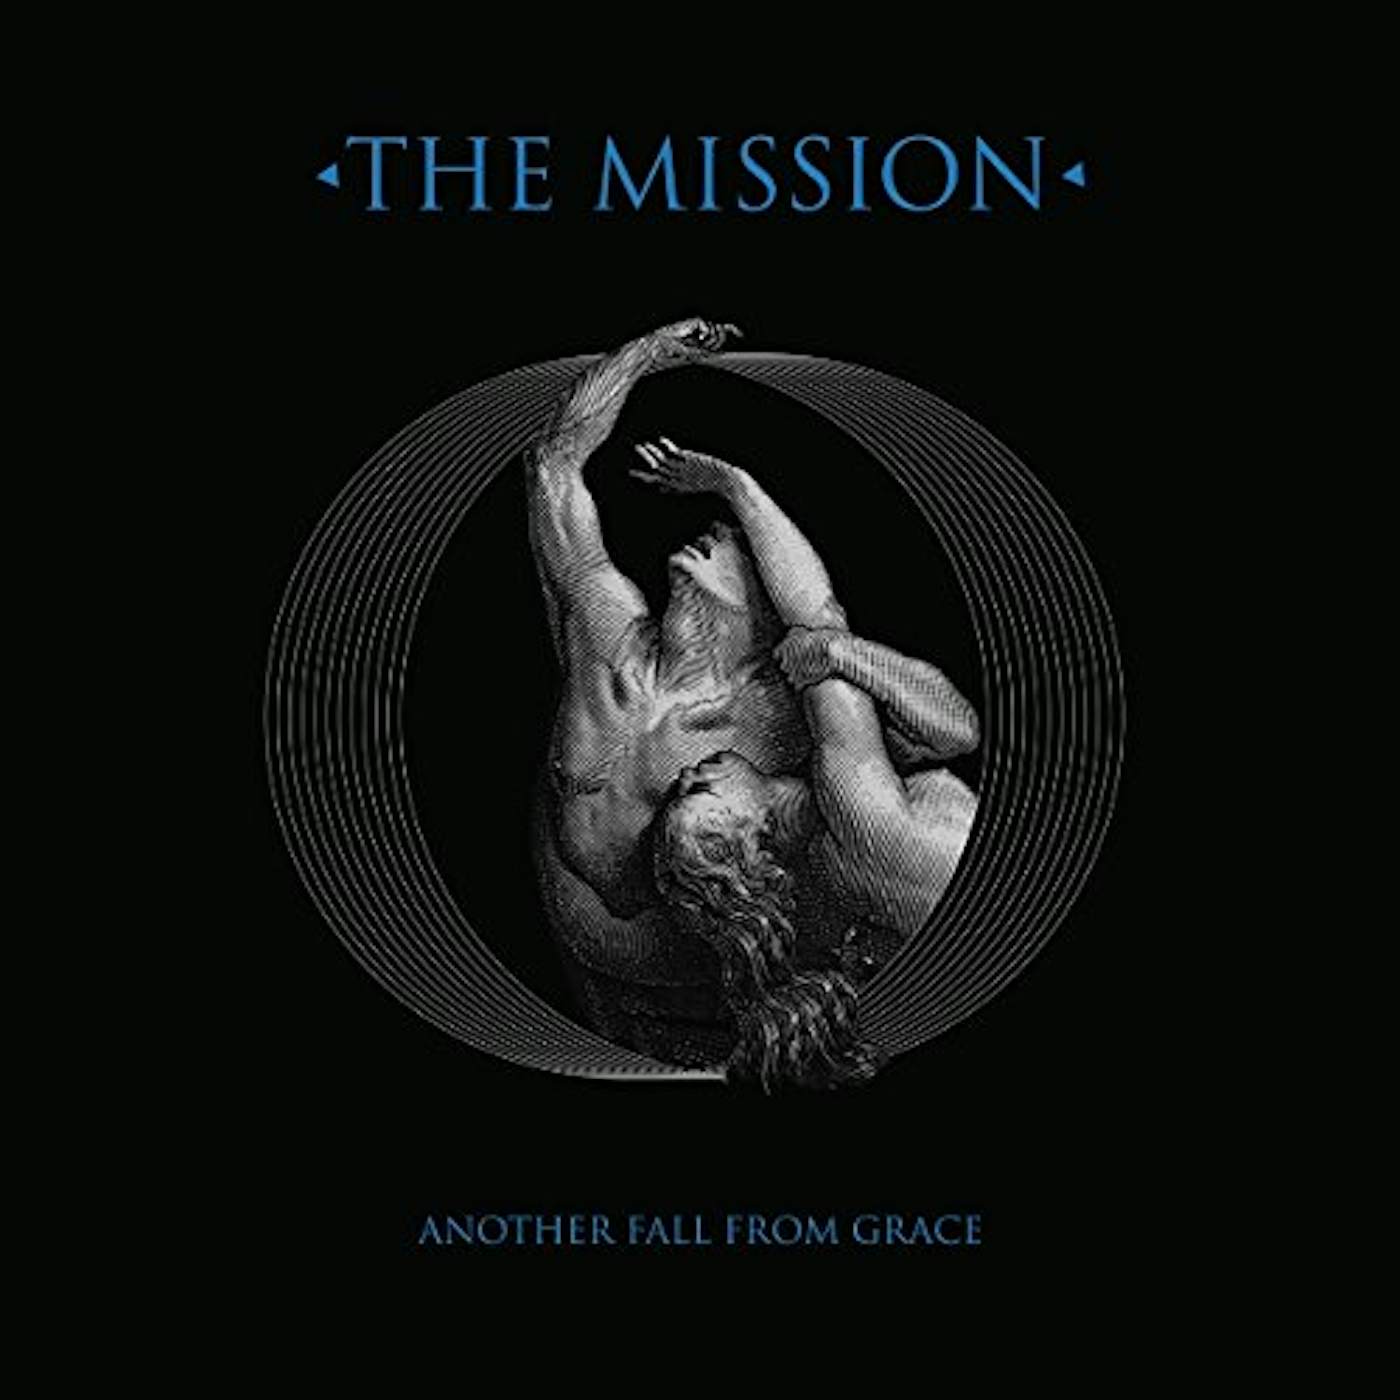 The Mission ANOTHER FALL FROM GRACE (2CD+DVD PAL REGION 2) CD